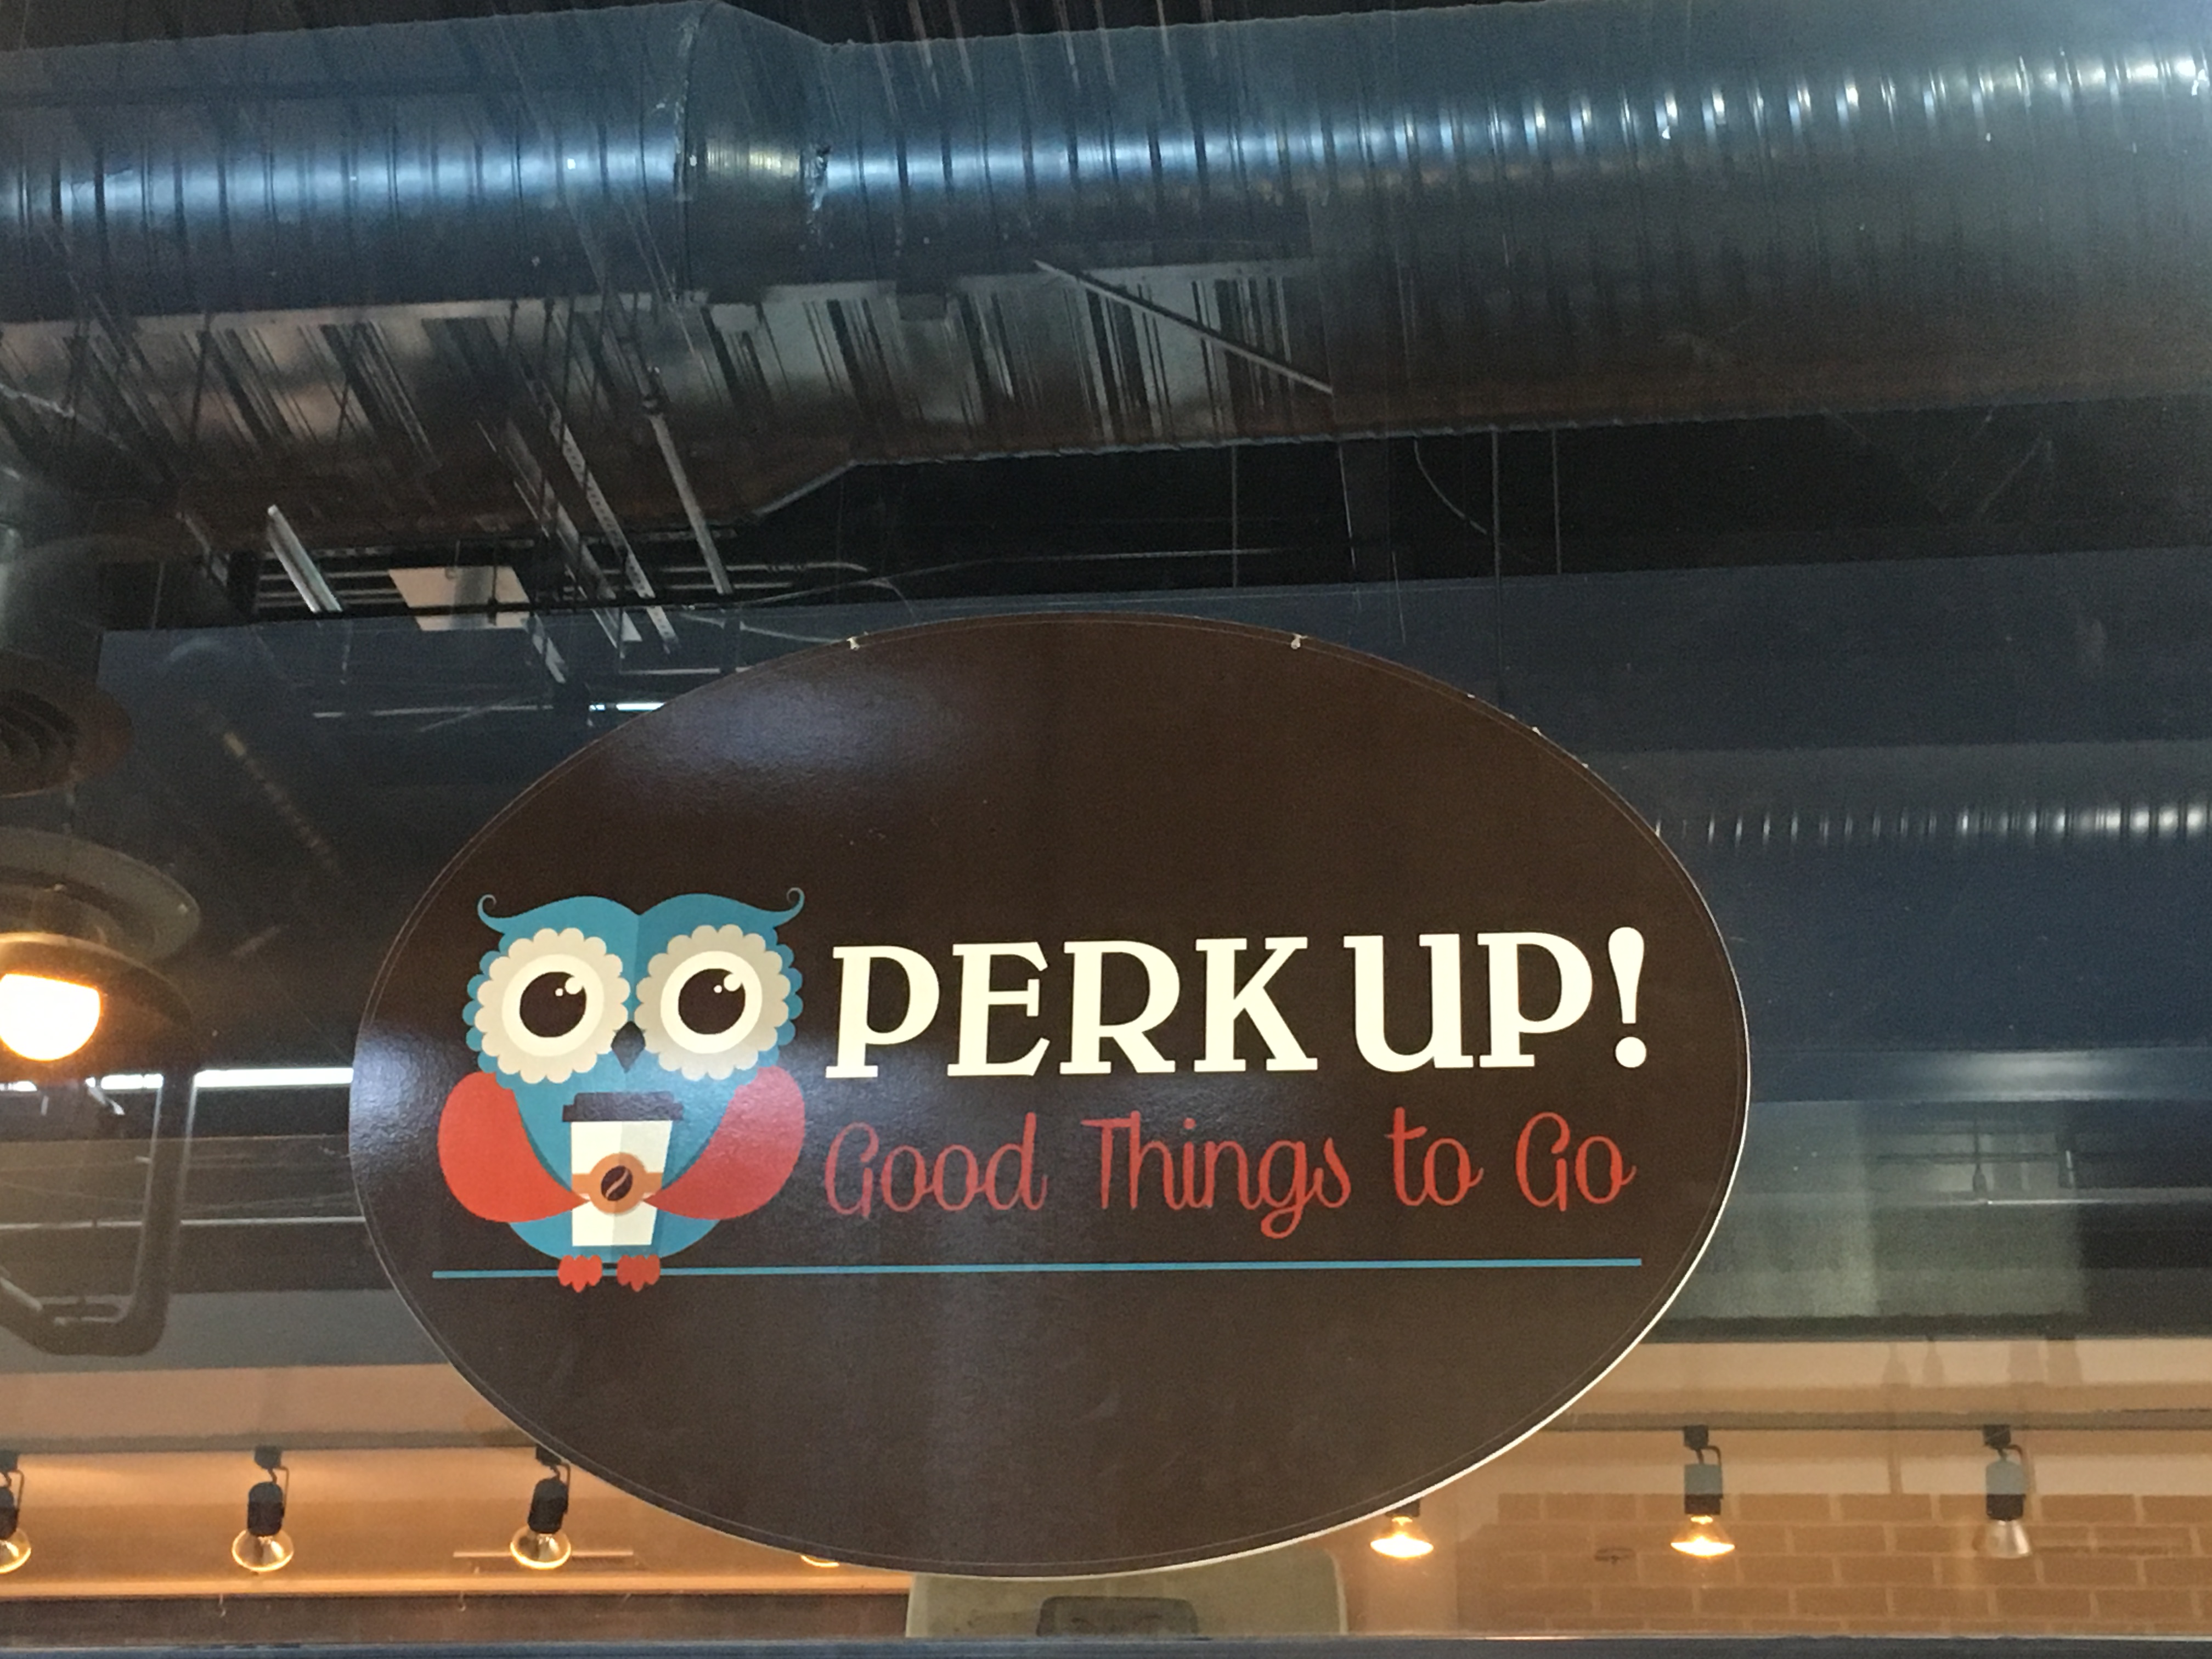 Perk Up, good things to go sign.